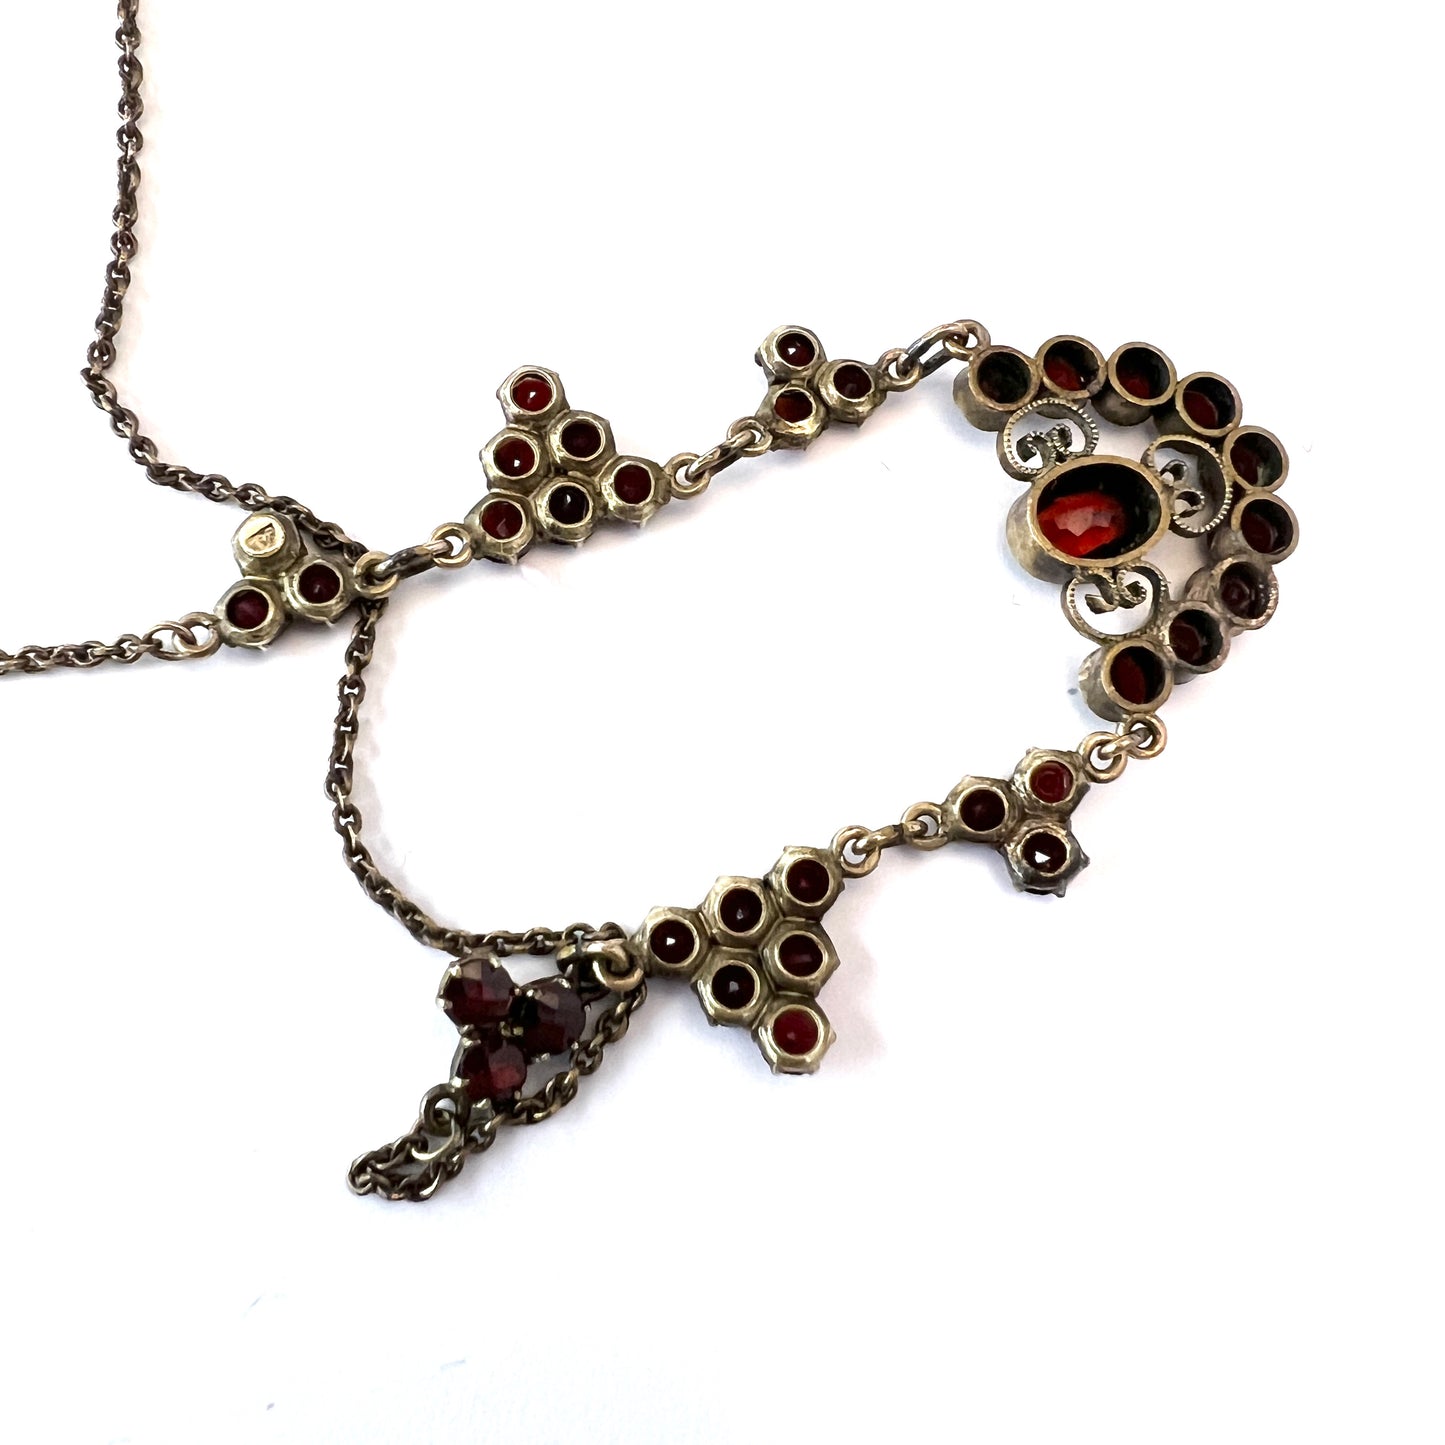 Early to Mid 1900s. Bohemian Garnet Gilt Metal Necklace. Makers Mark.